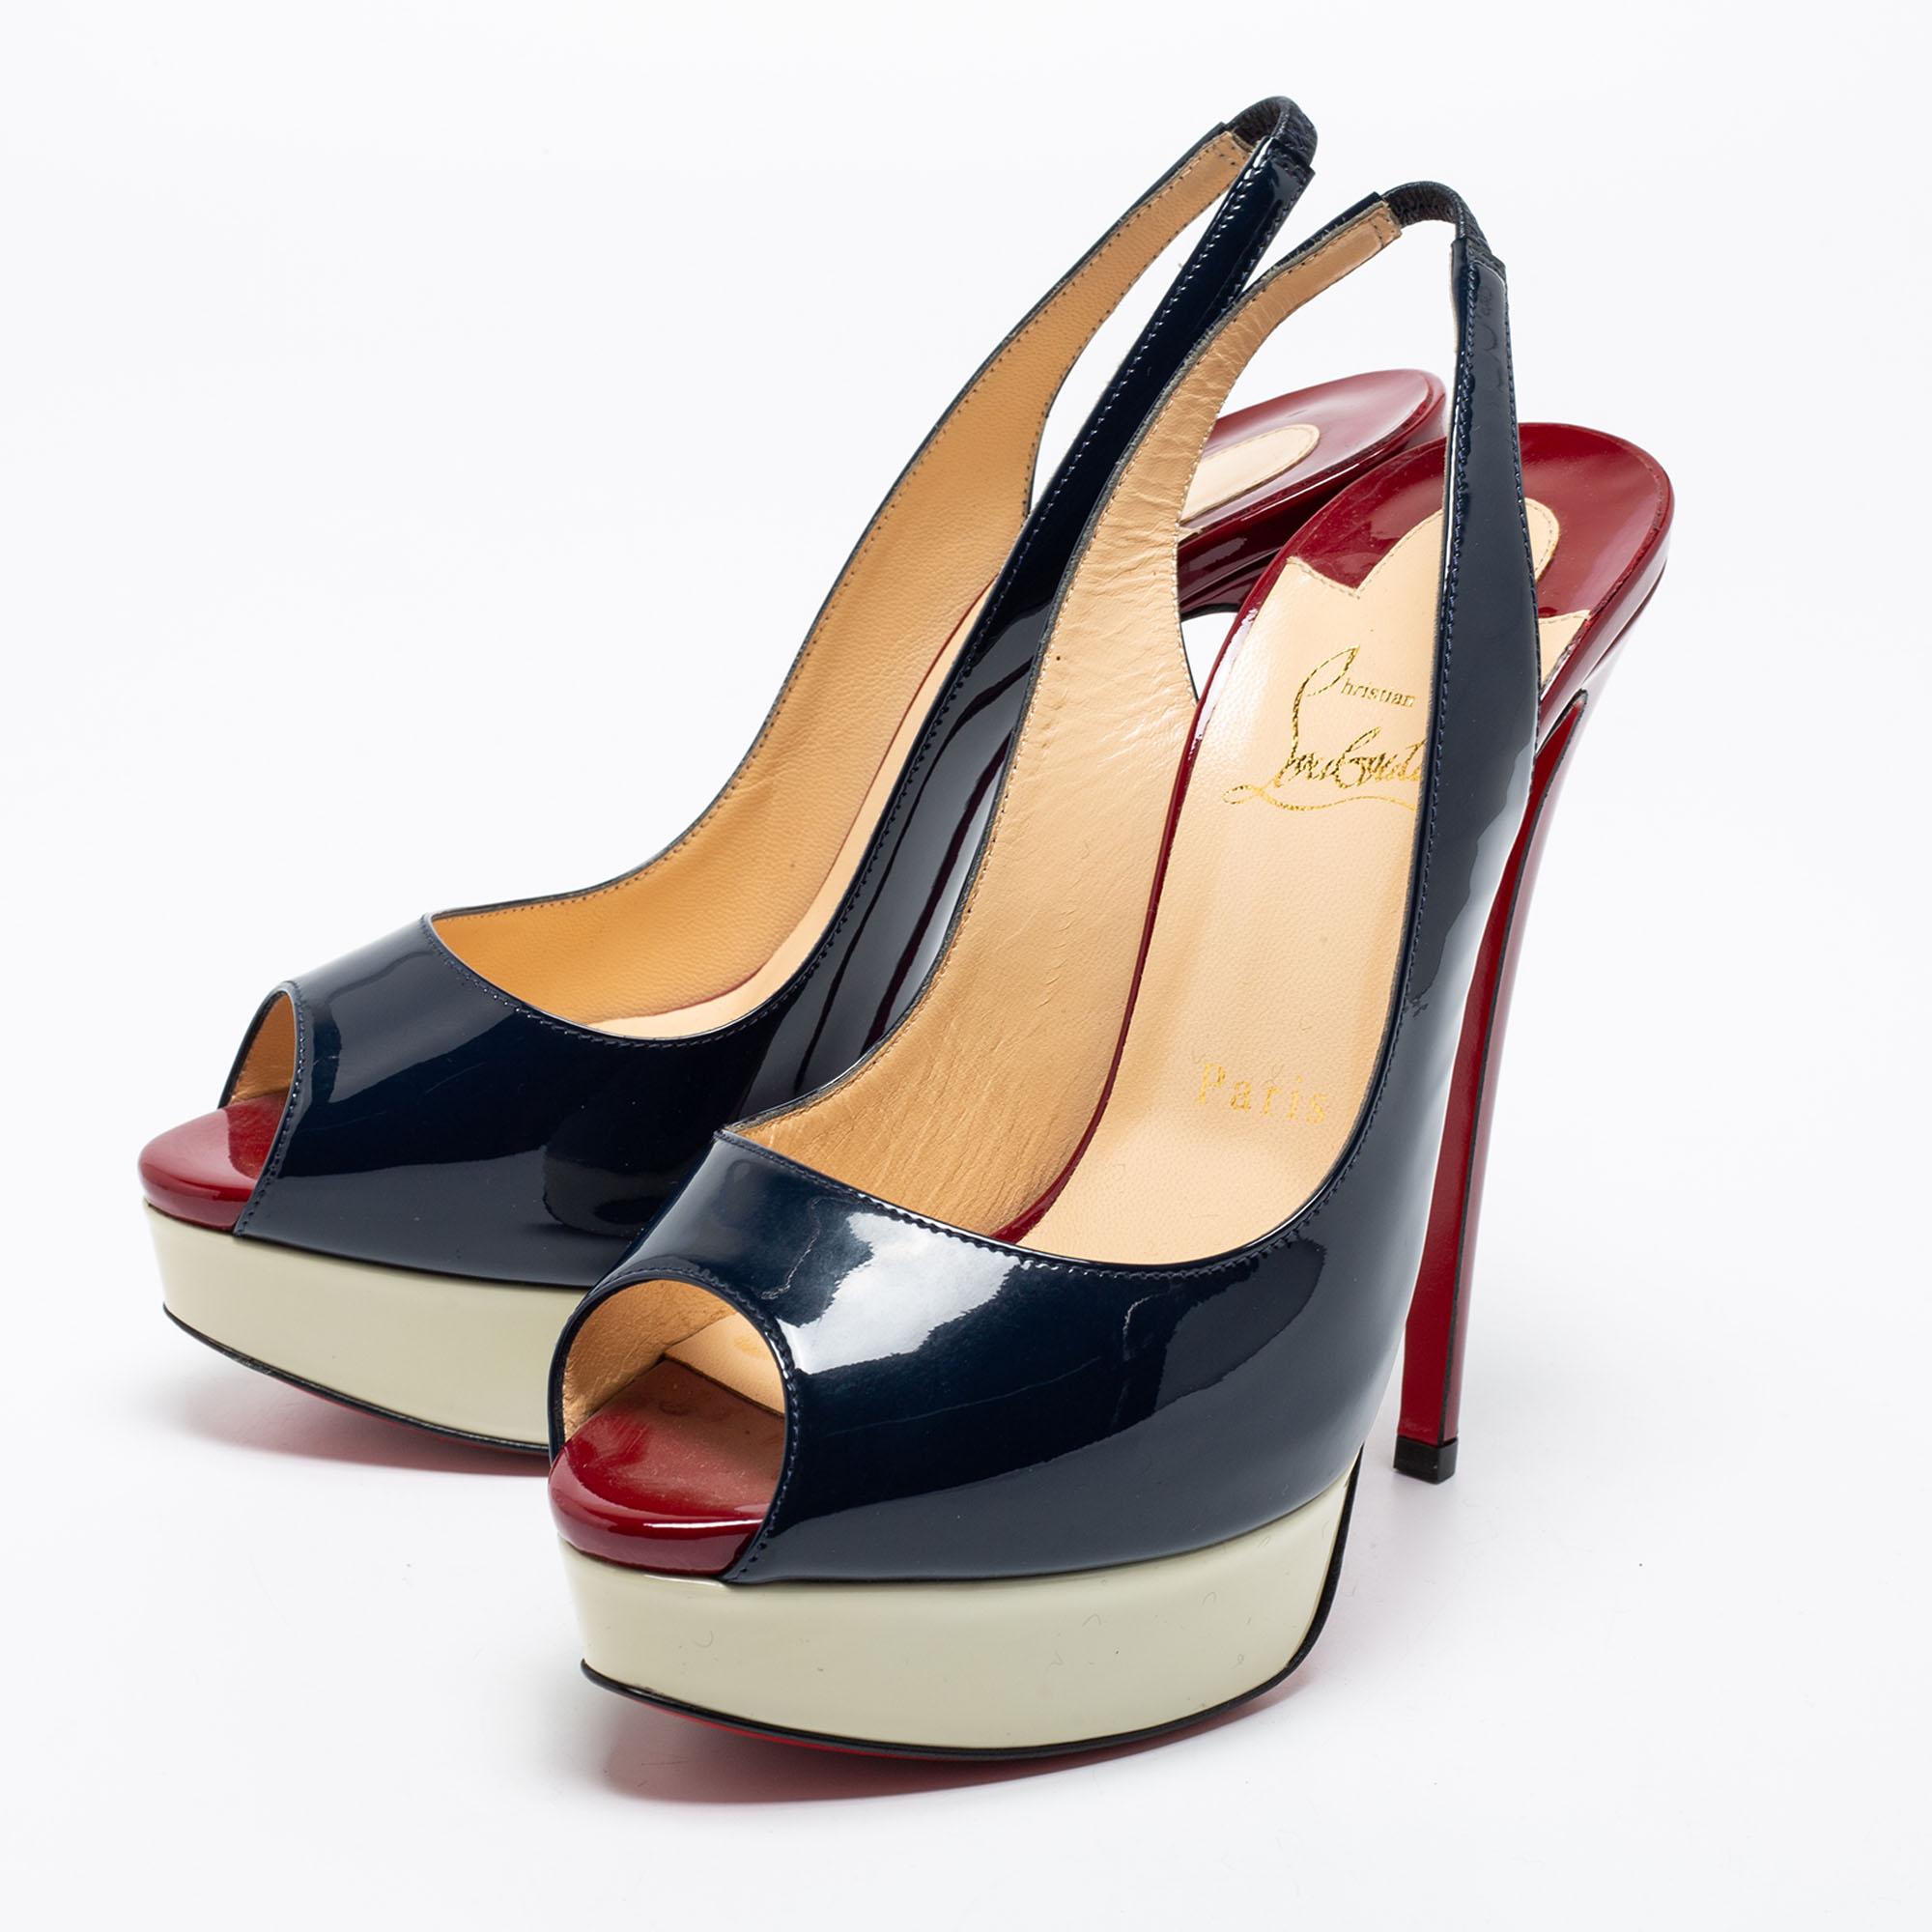 Stand out from the crowd with this gorgeous pair of Louboutins that exude high fashion with class! Crafted from patent leather, they feature three colors and a glossy exterior. Completed with peep-toes, leather insoles, 14 cm high heels, and